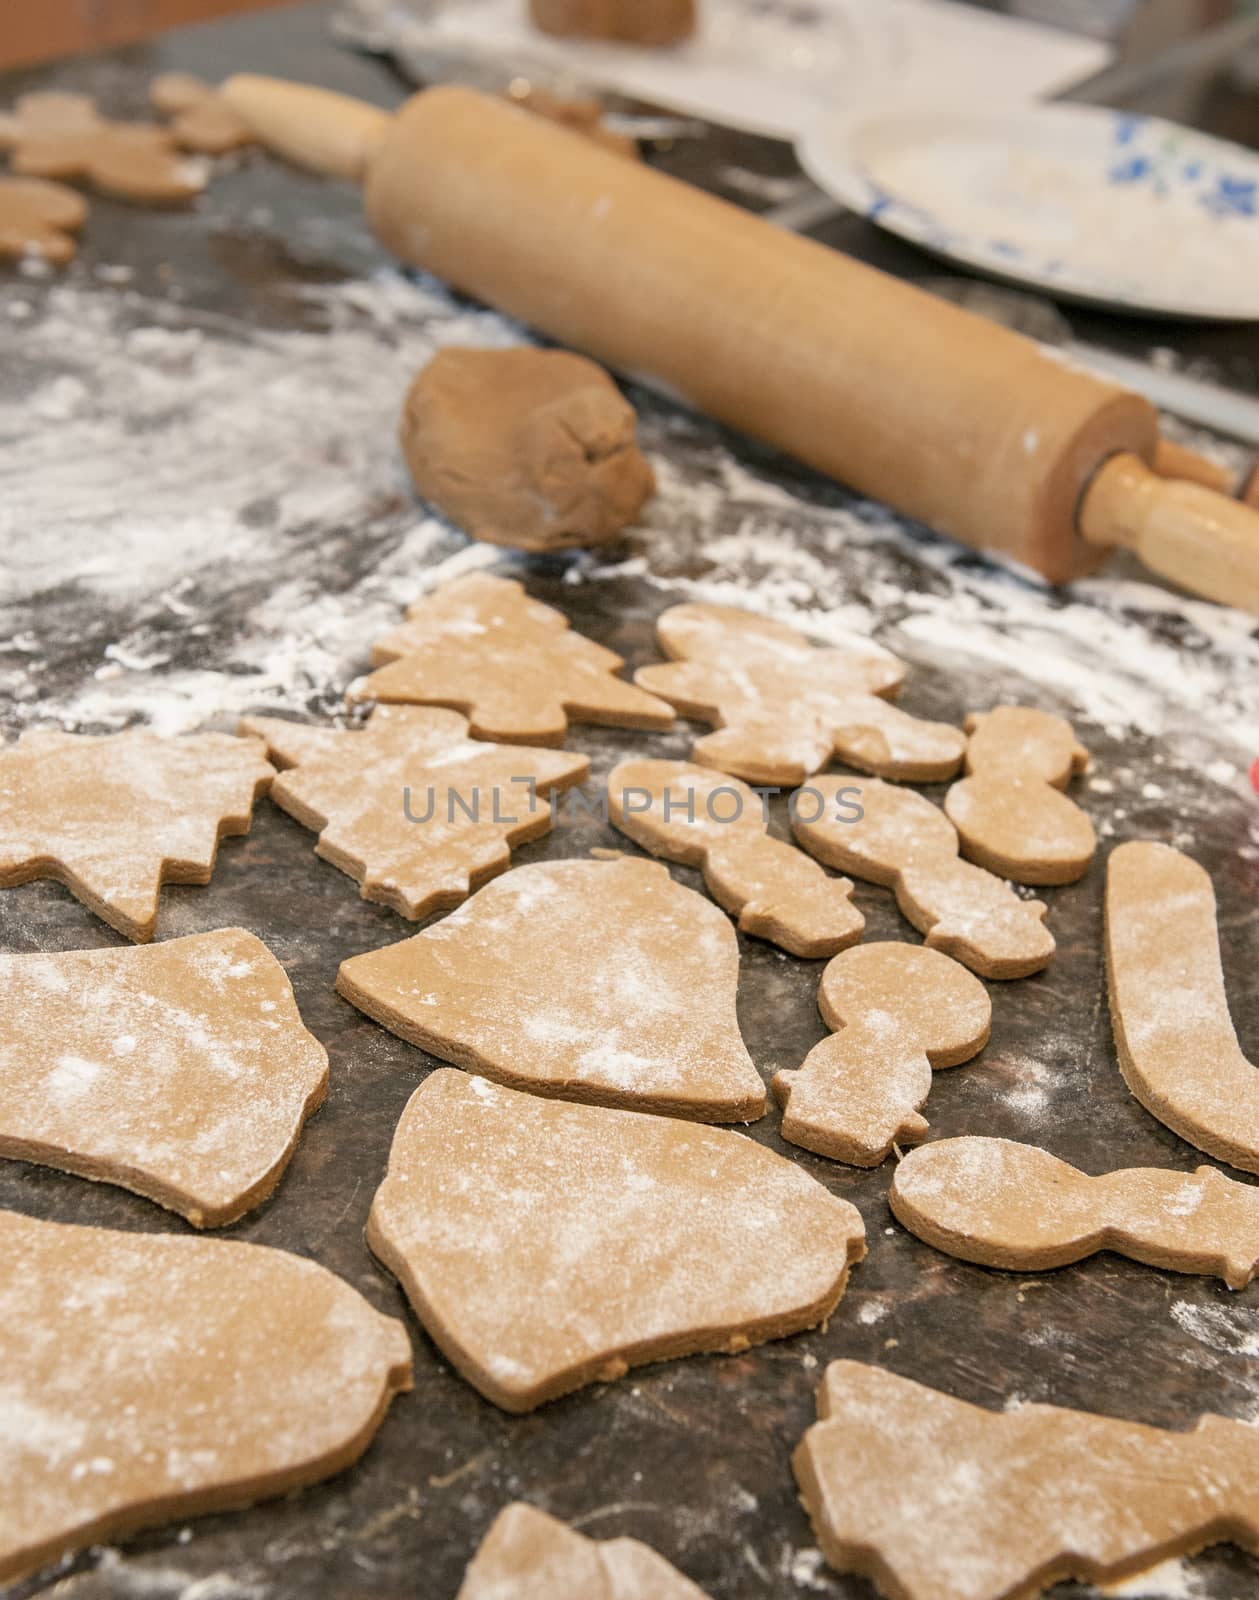 Making holiday gingerbread cookies by Njean